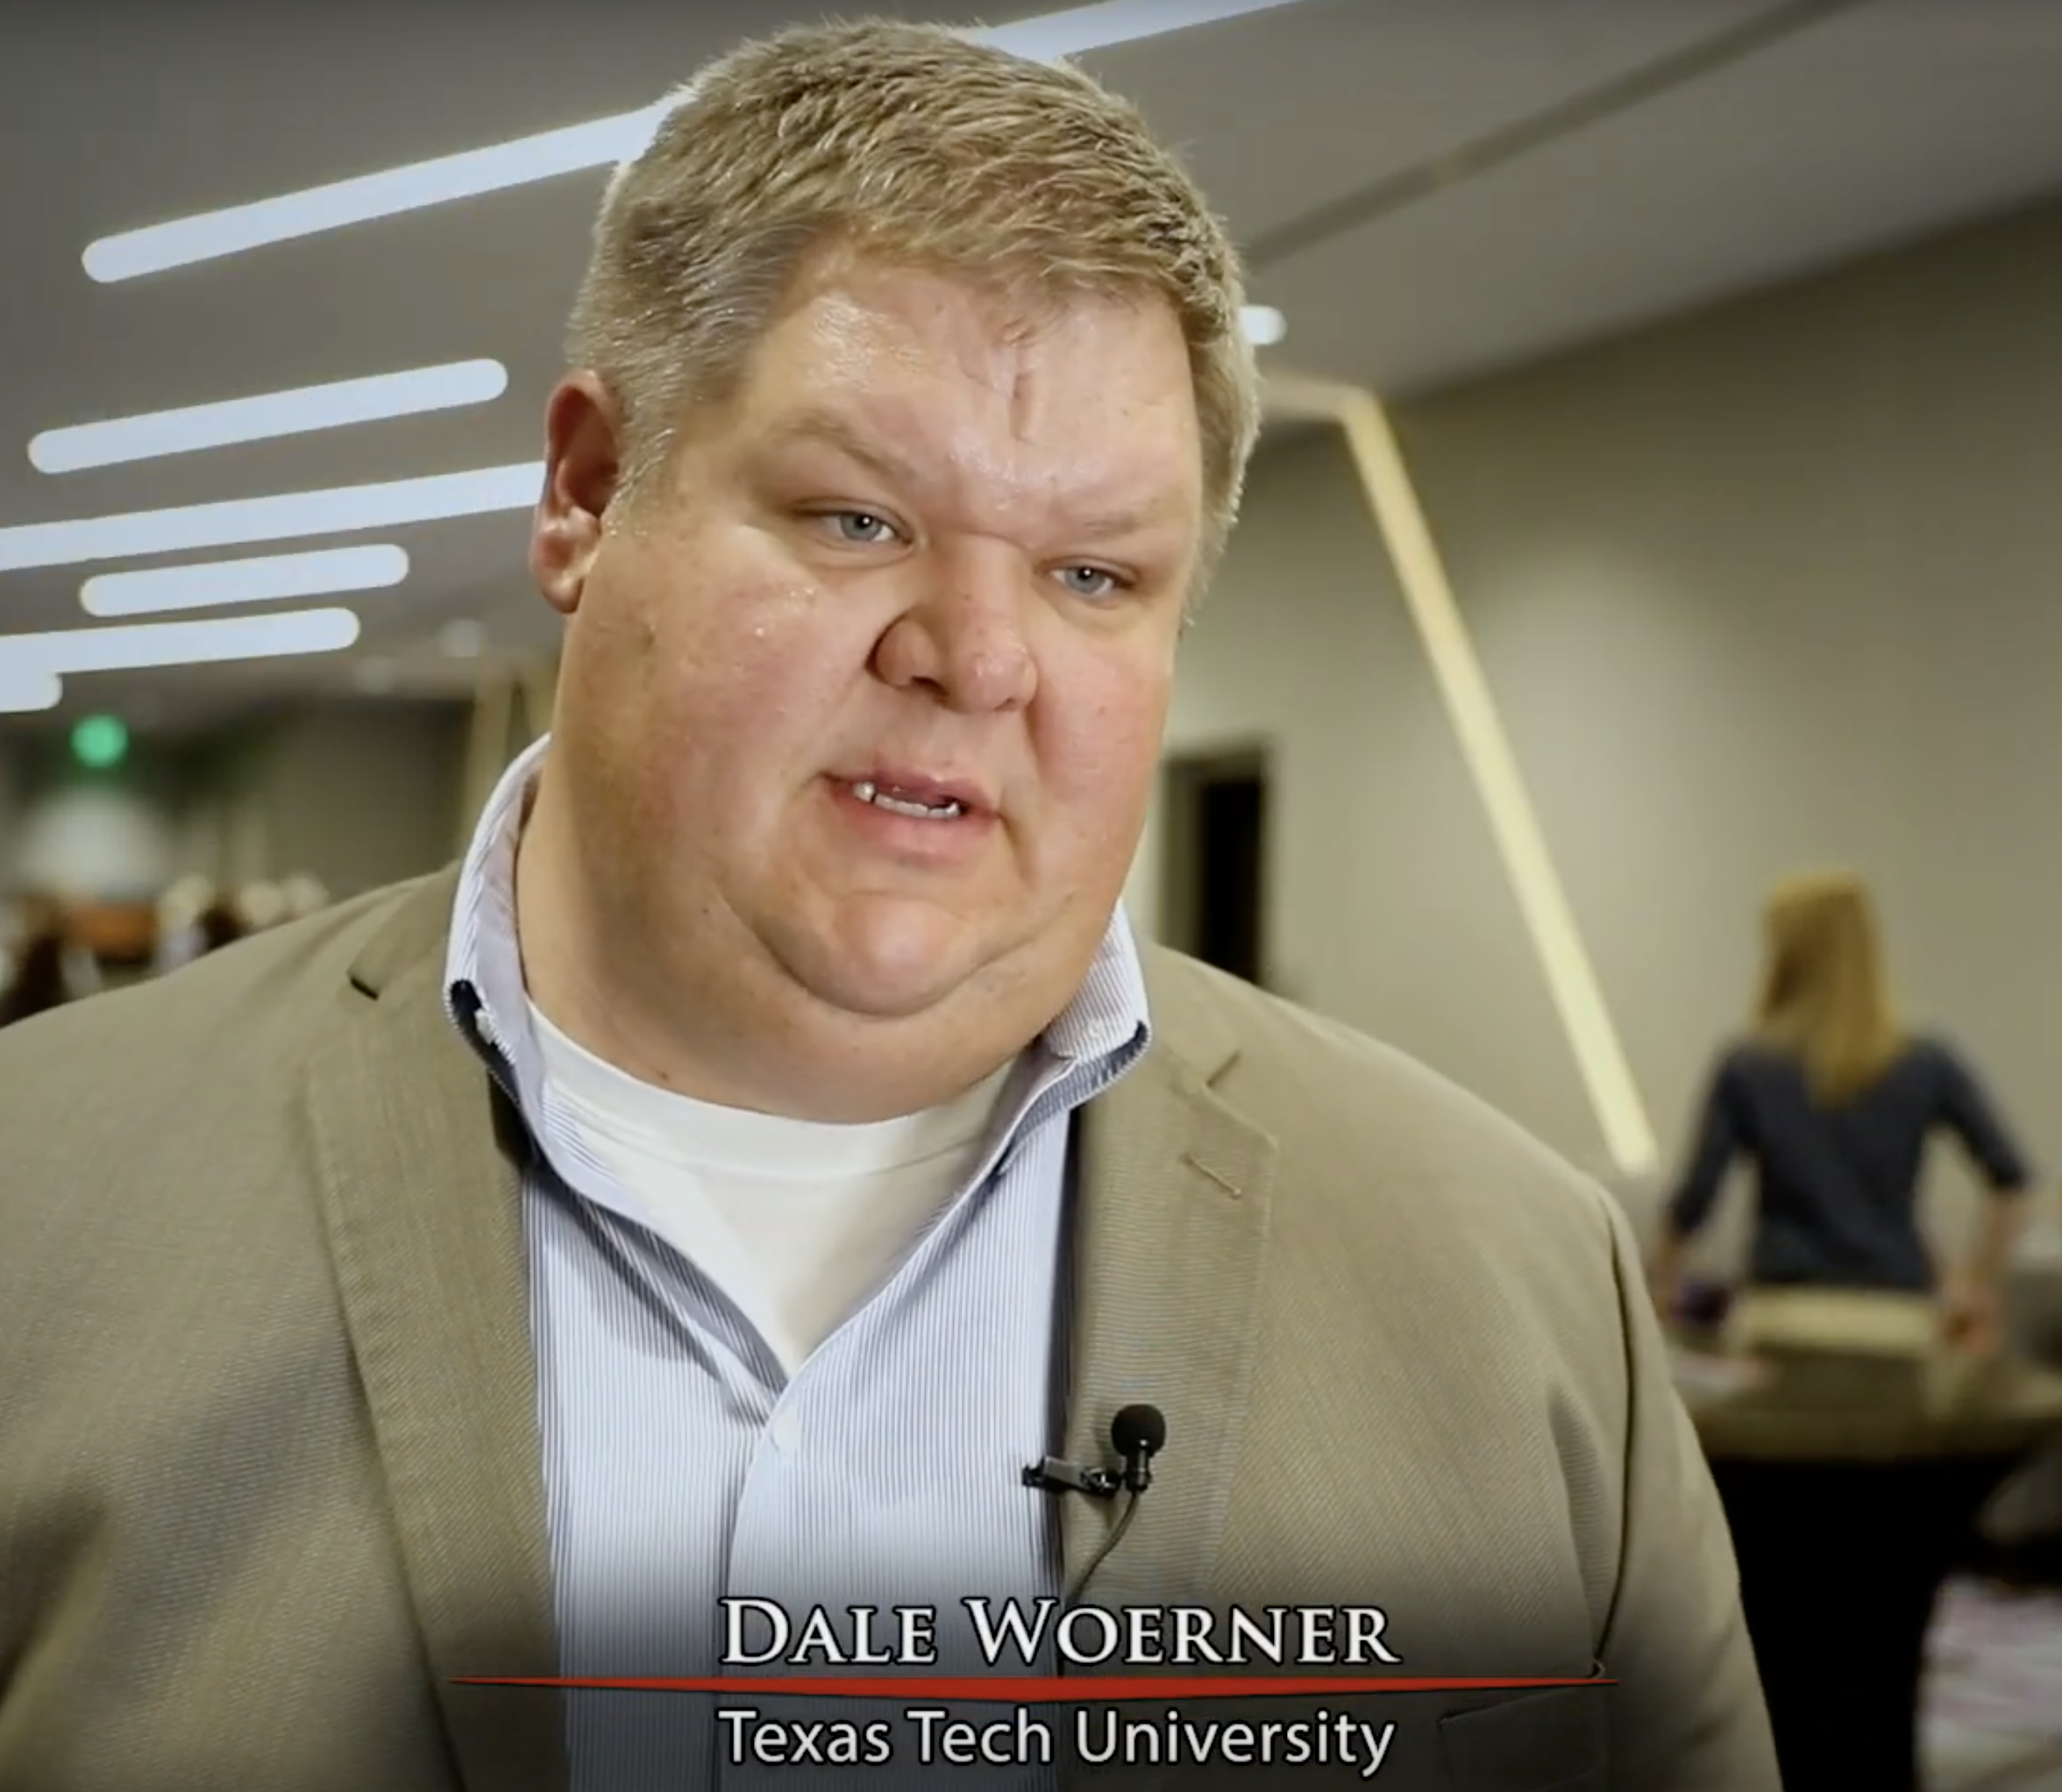 Texas Tech's Dale Woerner Talks About the Changes in Beef Grading